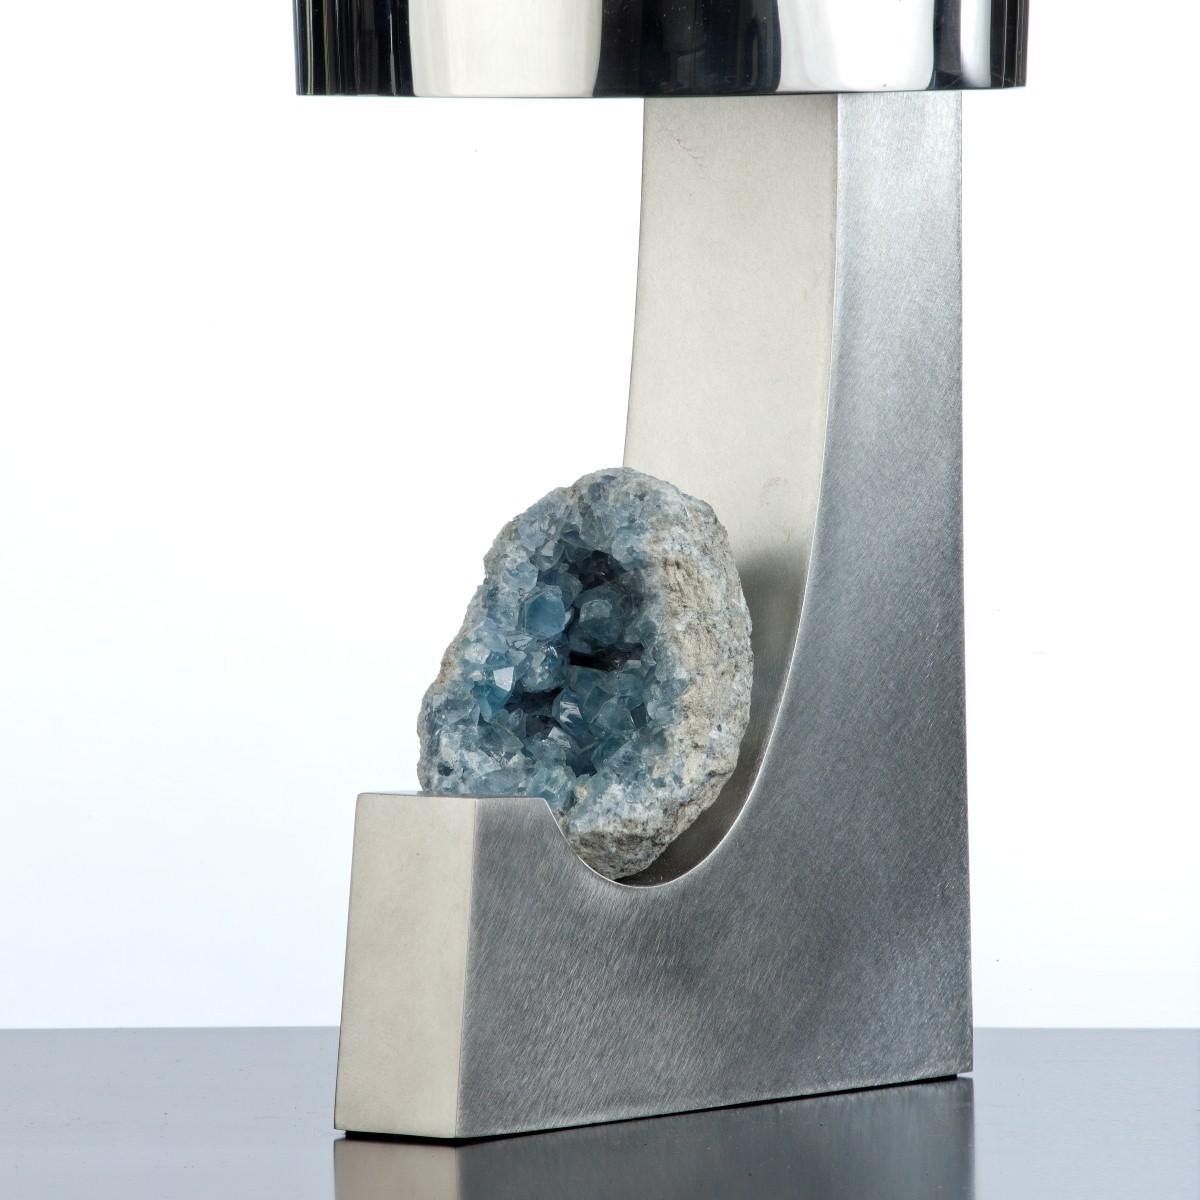 Studio Caira Mandaglio
Pair of brushed steel table lamps
Pair of brushed and polished steel hand made and hand polished contemporary 
table lamps with inset celestite mineral detail. The Celestite was quarried from 
Sakoany Mine Sofia region of